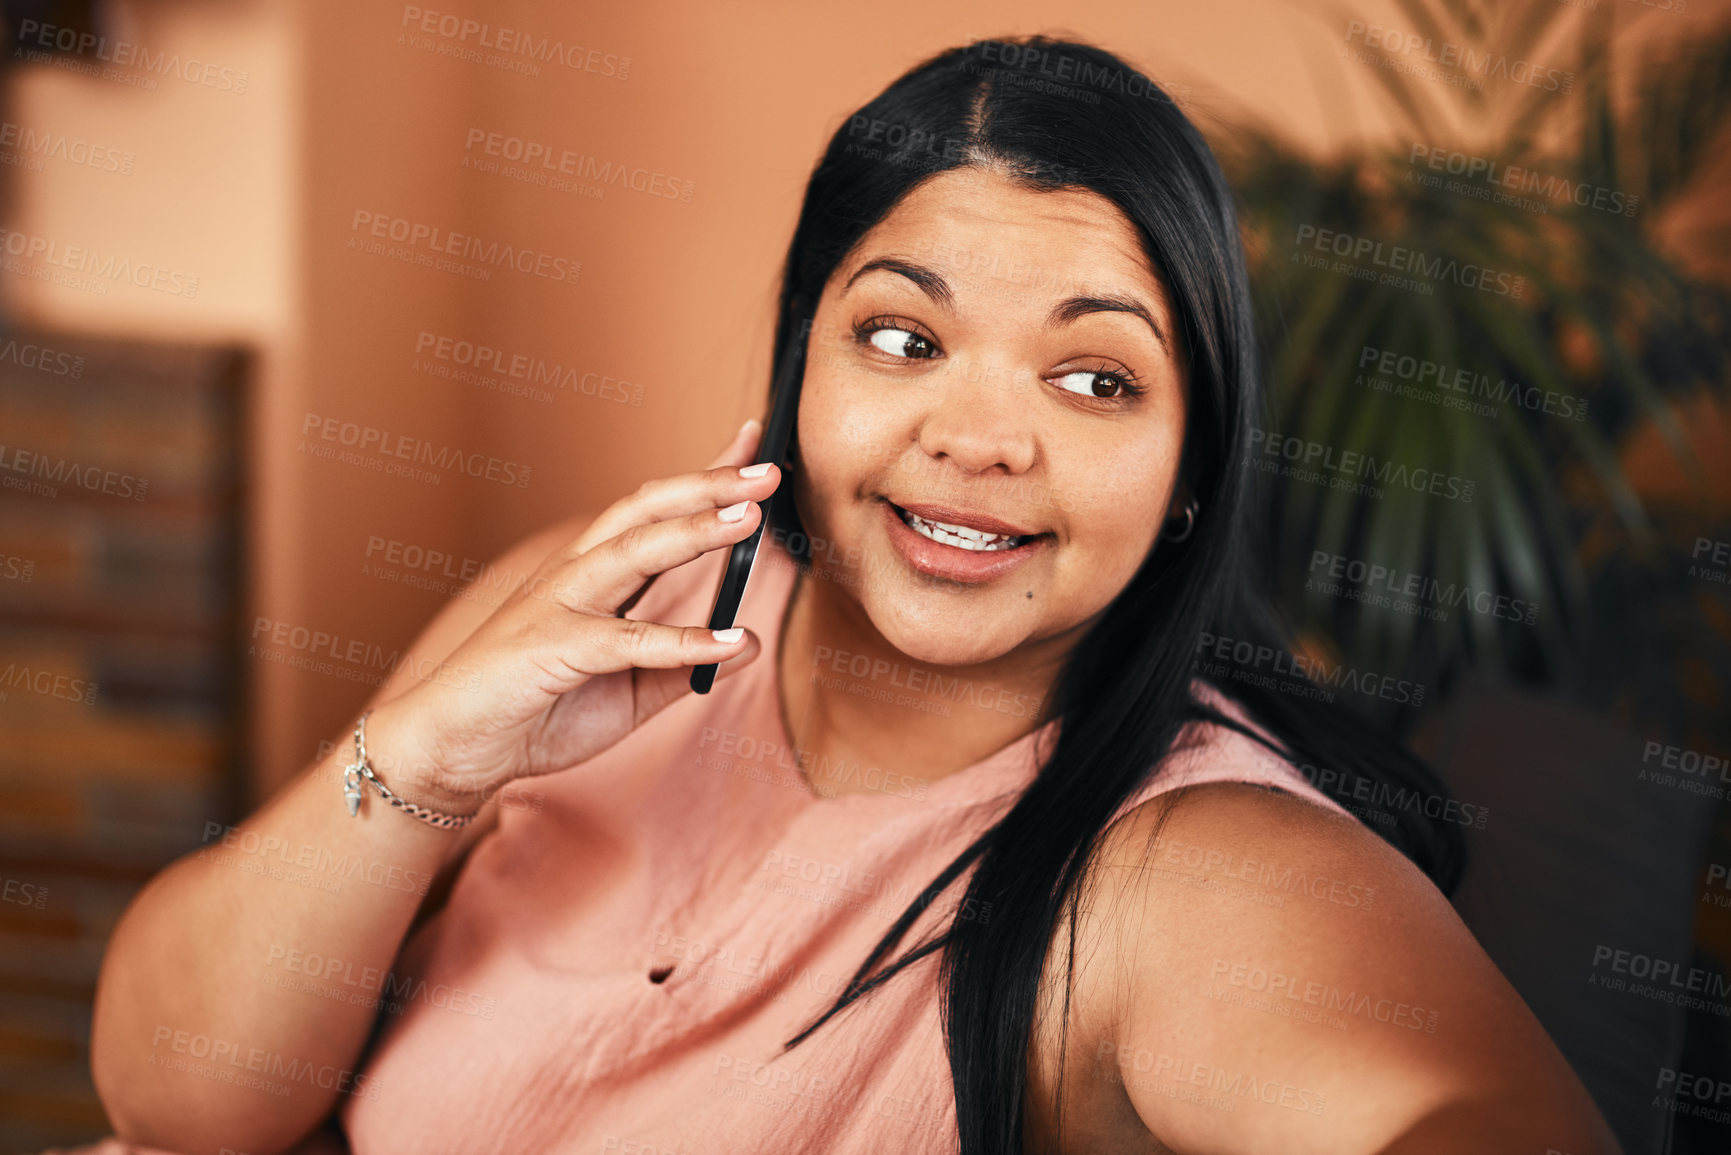 Buy stock photo Shot of a young woman talking on a cellphone at home